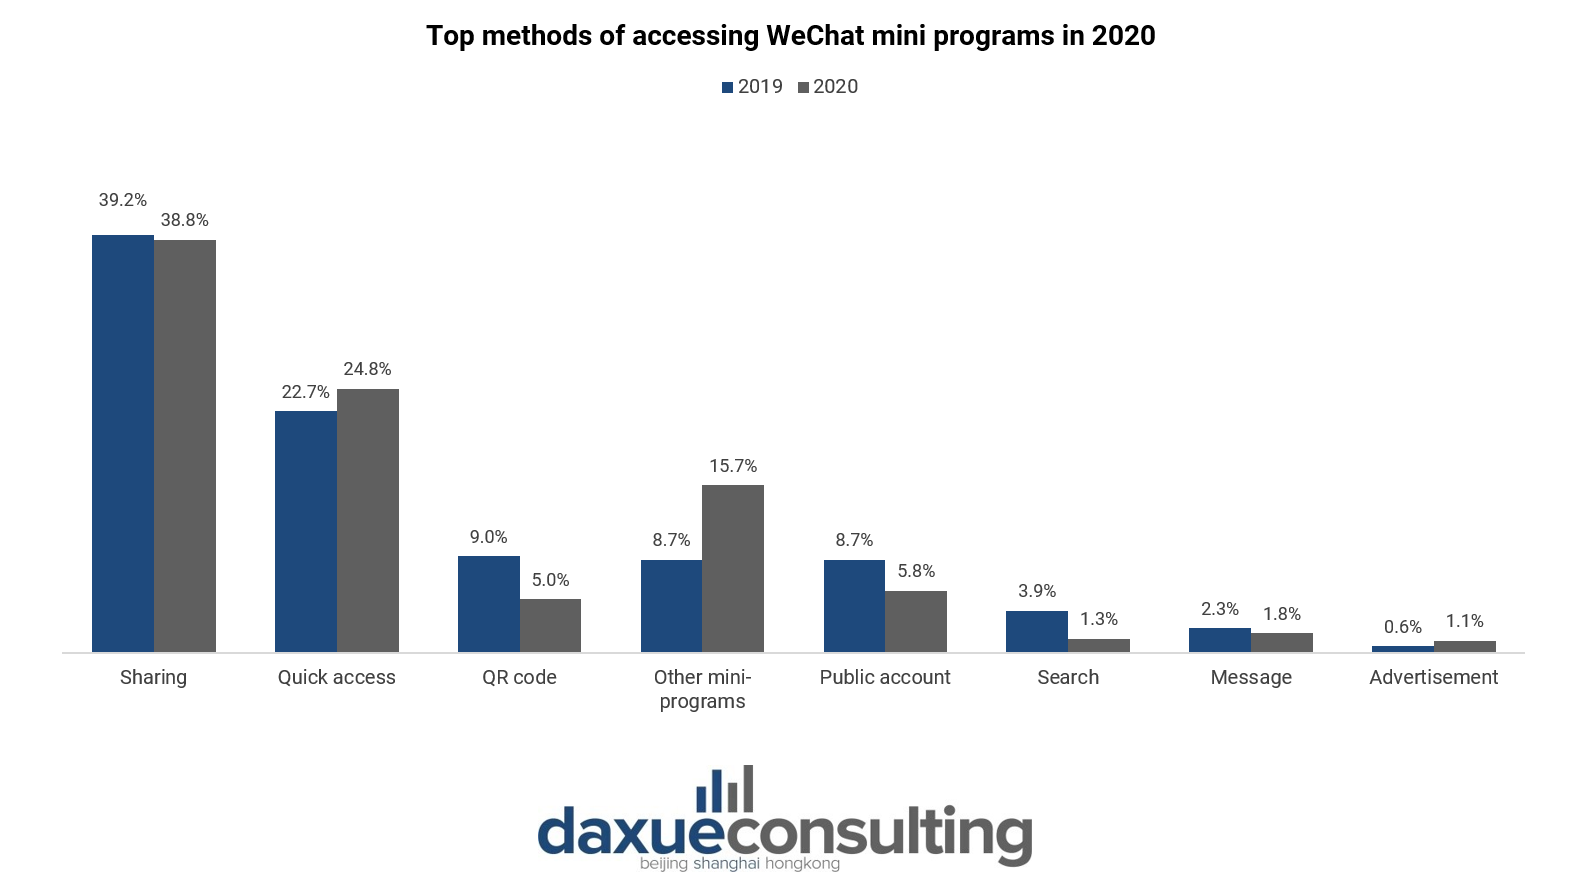 top methods of accessing WeChat MP in 2020